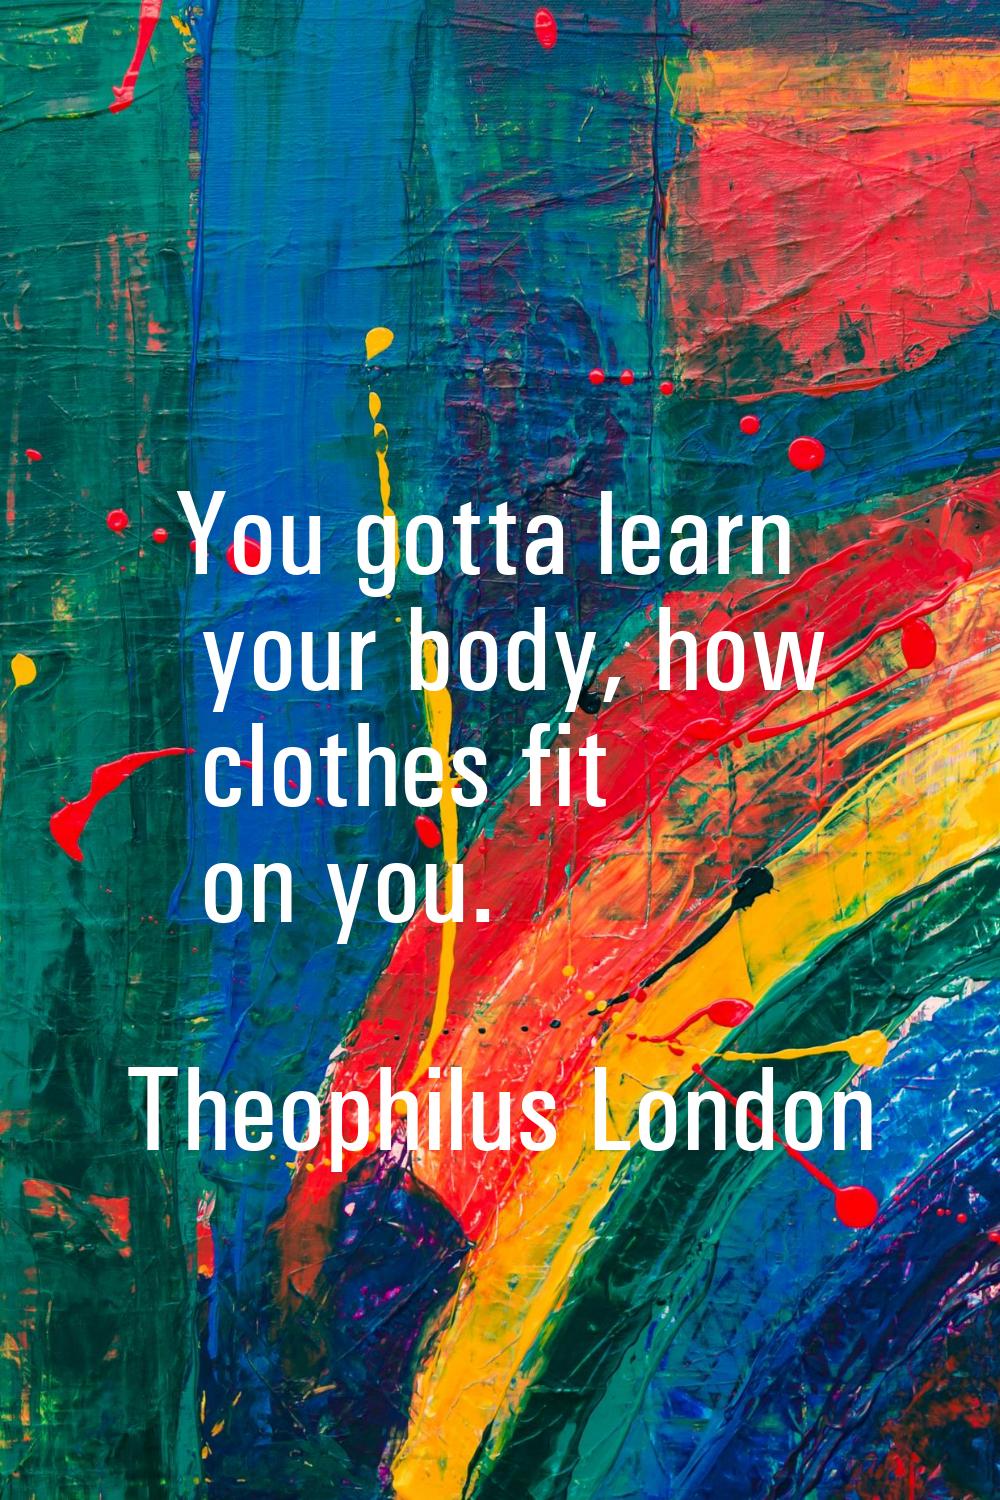 You gotta learn your body, how clothes fit on you.